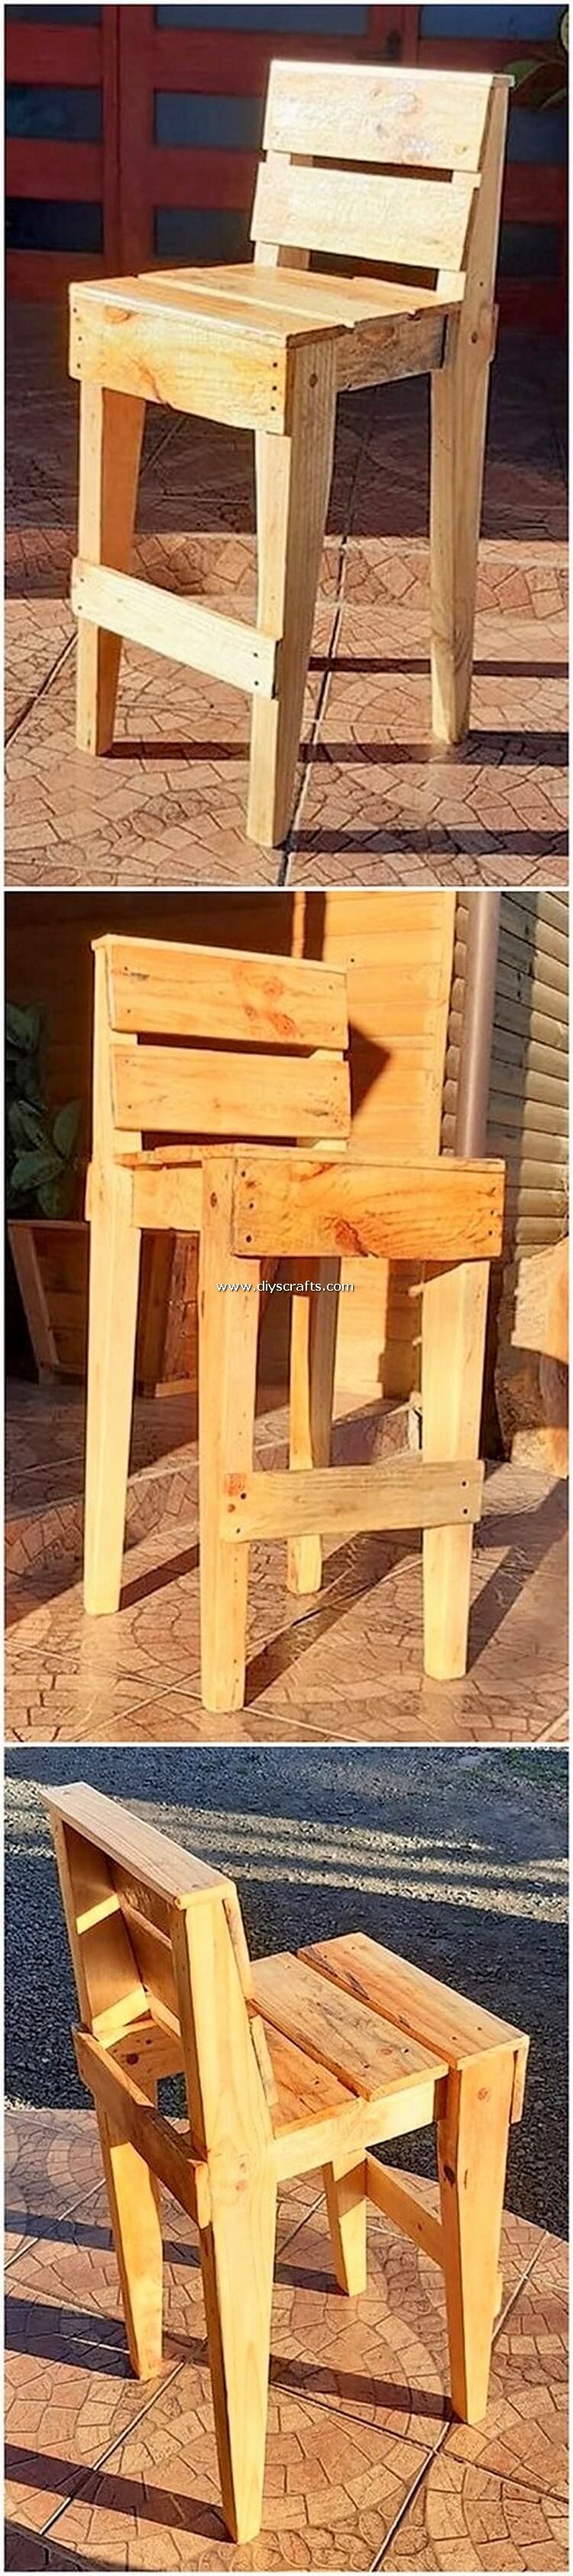 Wood-Pallet-Chair